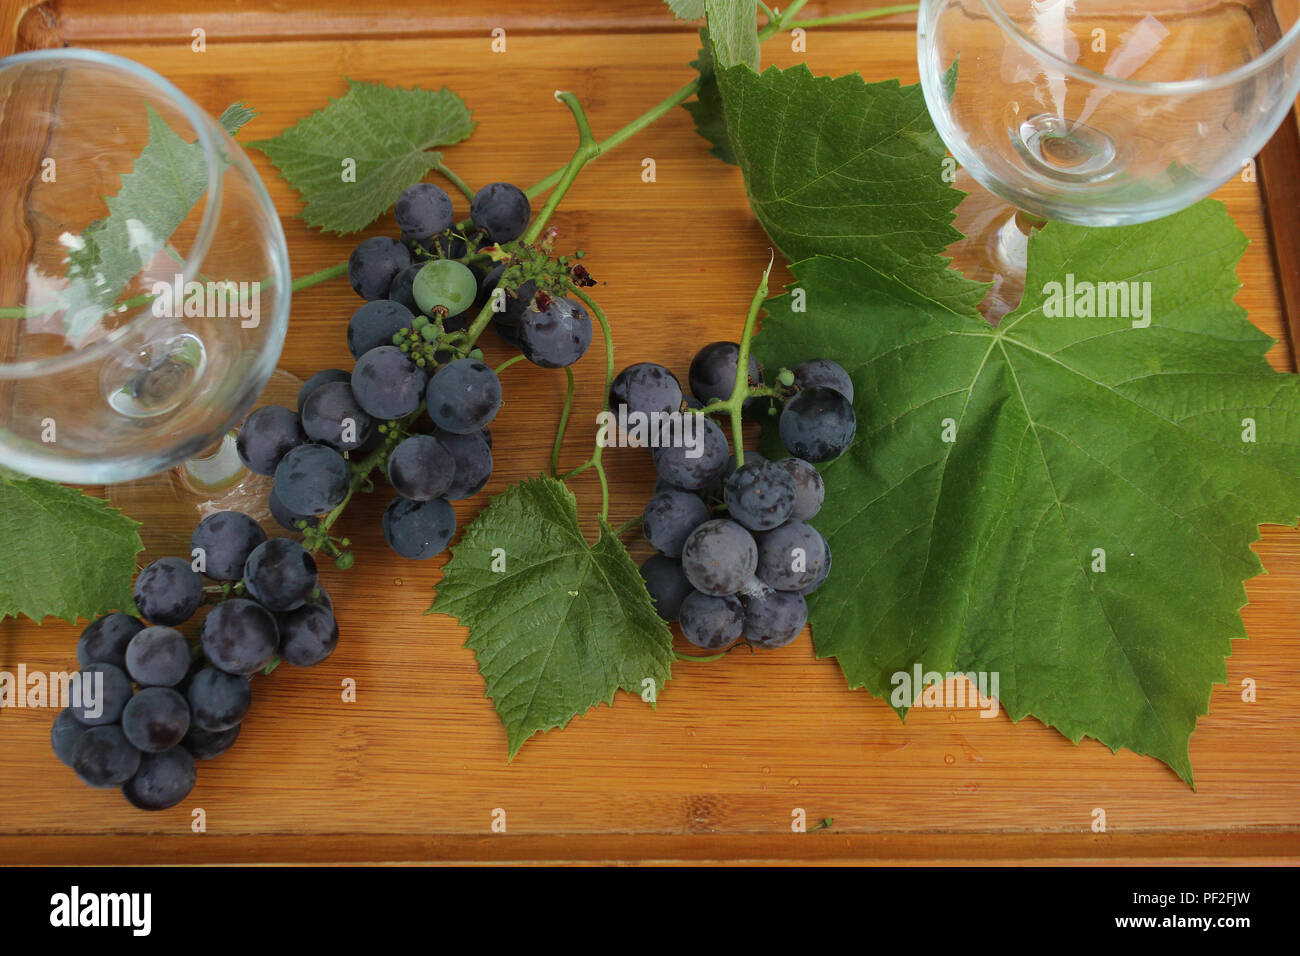 Still life - two empty wine glasses, blue grapes and leaves arranged on a wooden tray Stock Photo